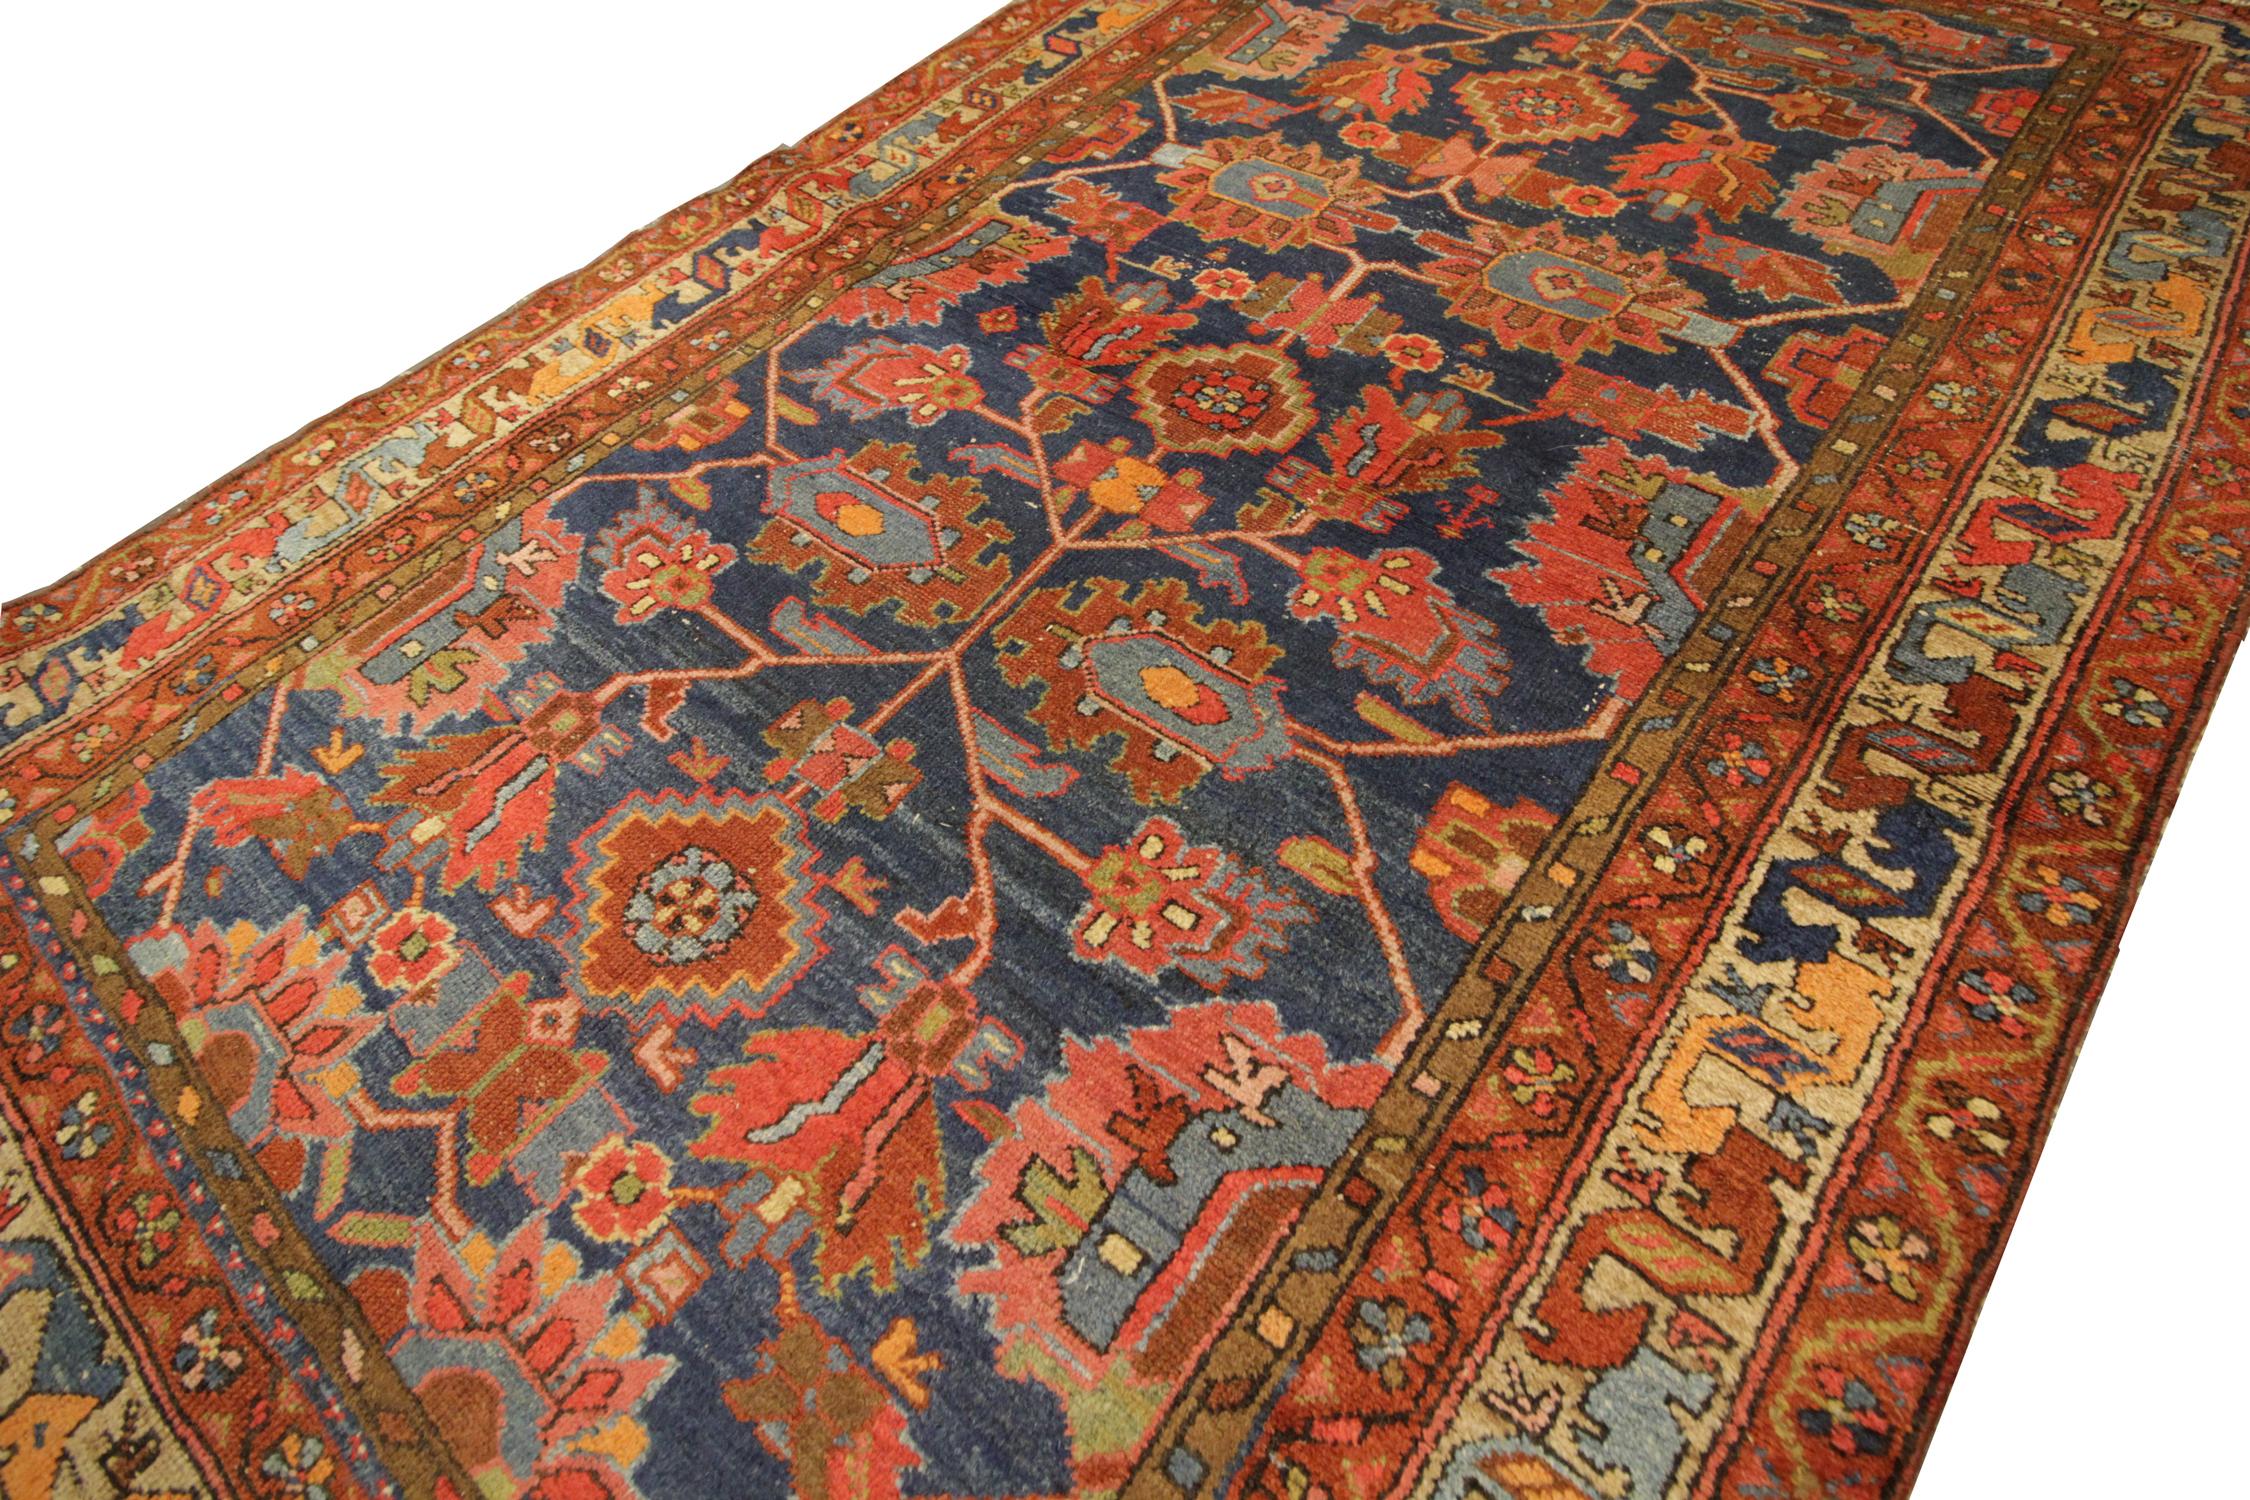 This antique Farhan carpet rug was handwoven with beautiful red and blue colourways. This rug features a floral tribal motif symmetrical design. The deep blue background contrasts beautifully with the interweaving red design to create an